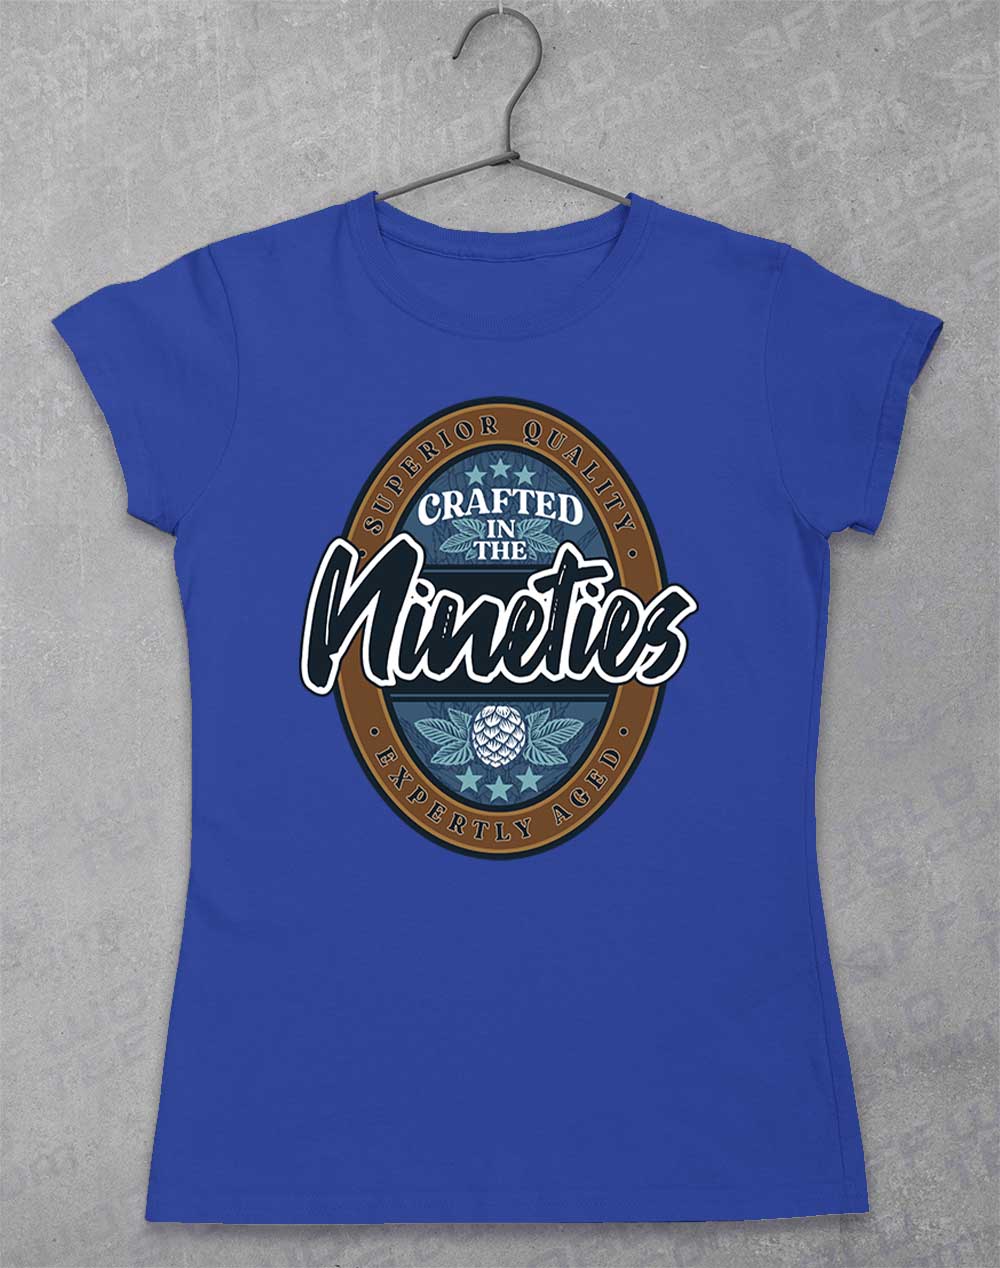 Crafted in the Nineties Women's T-Shirt